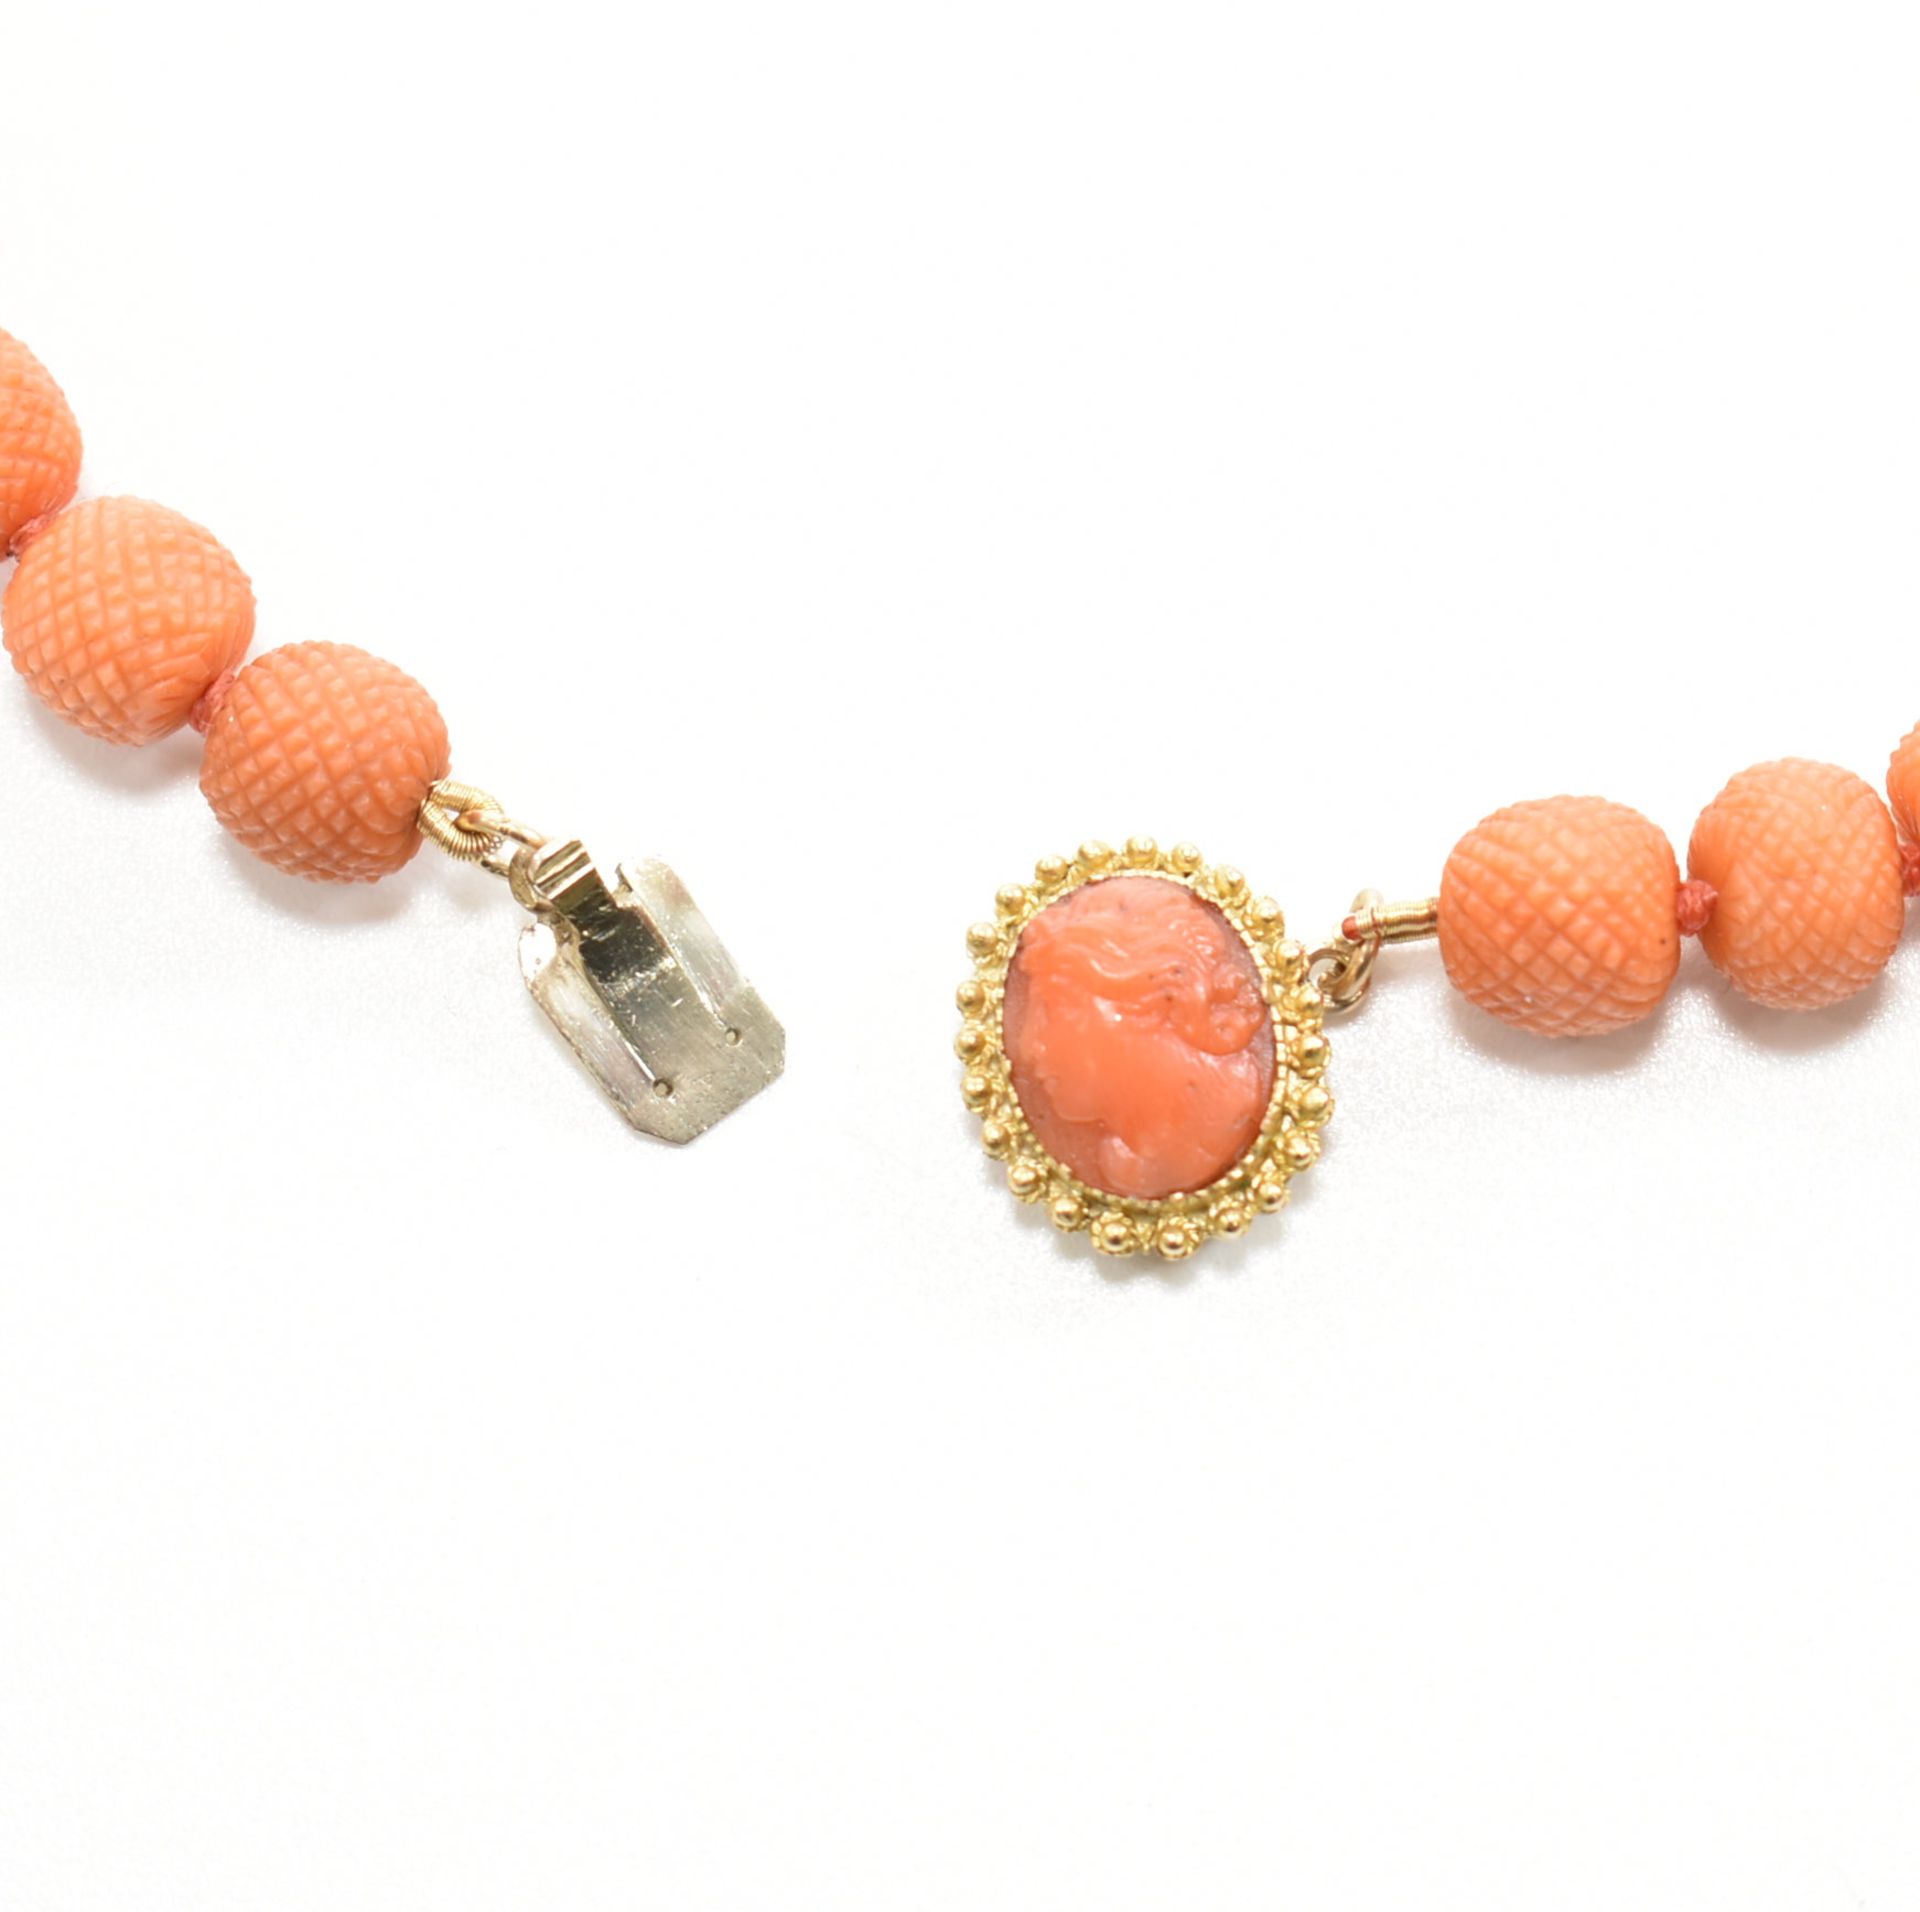 GEORGIAN CORAL PINEAPPLE BEAD NECKLACE - Image 4 of 8